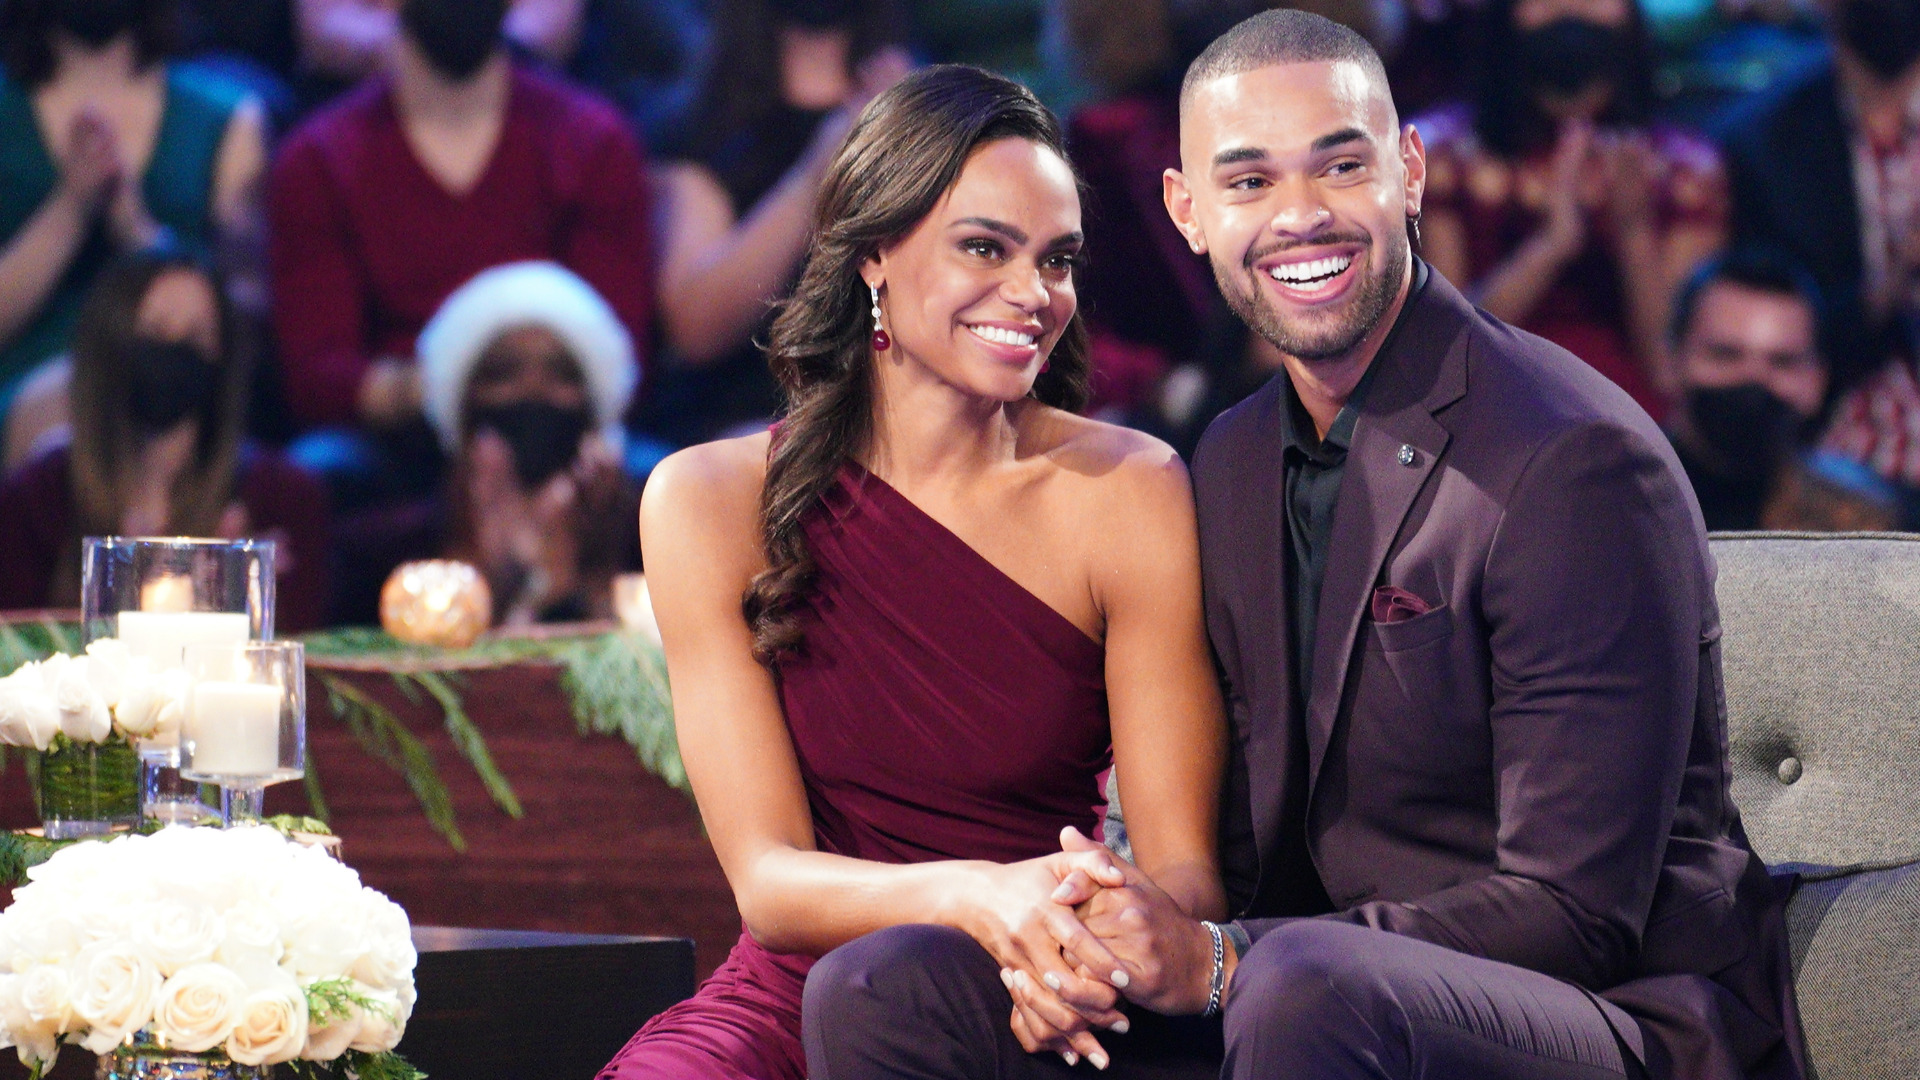 'The Bachelorette' stars Michelle Young and Nayte Olukoya pose on stage in 'After the Final Rose'